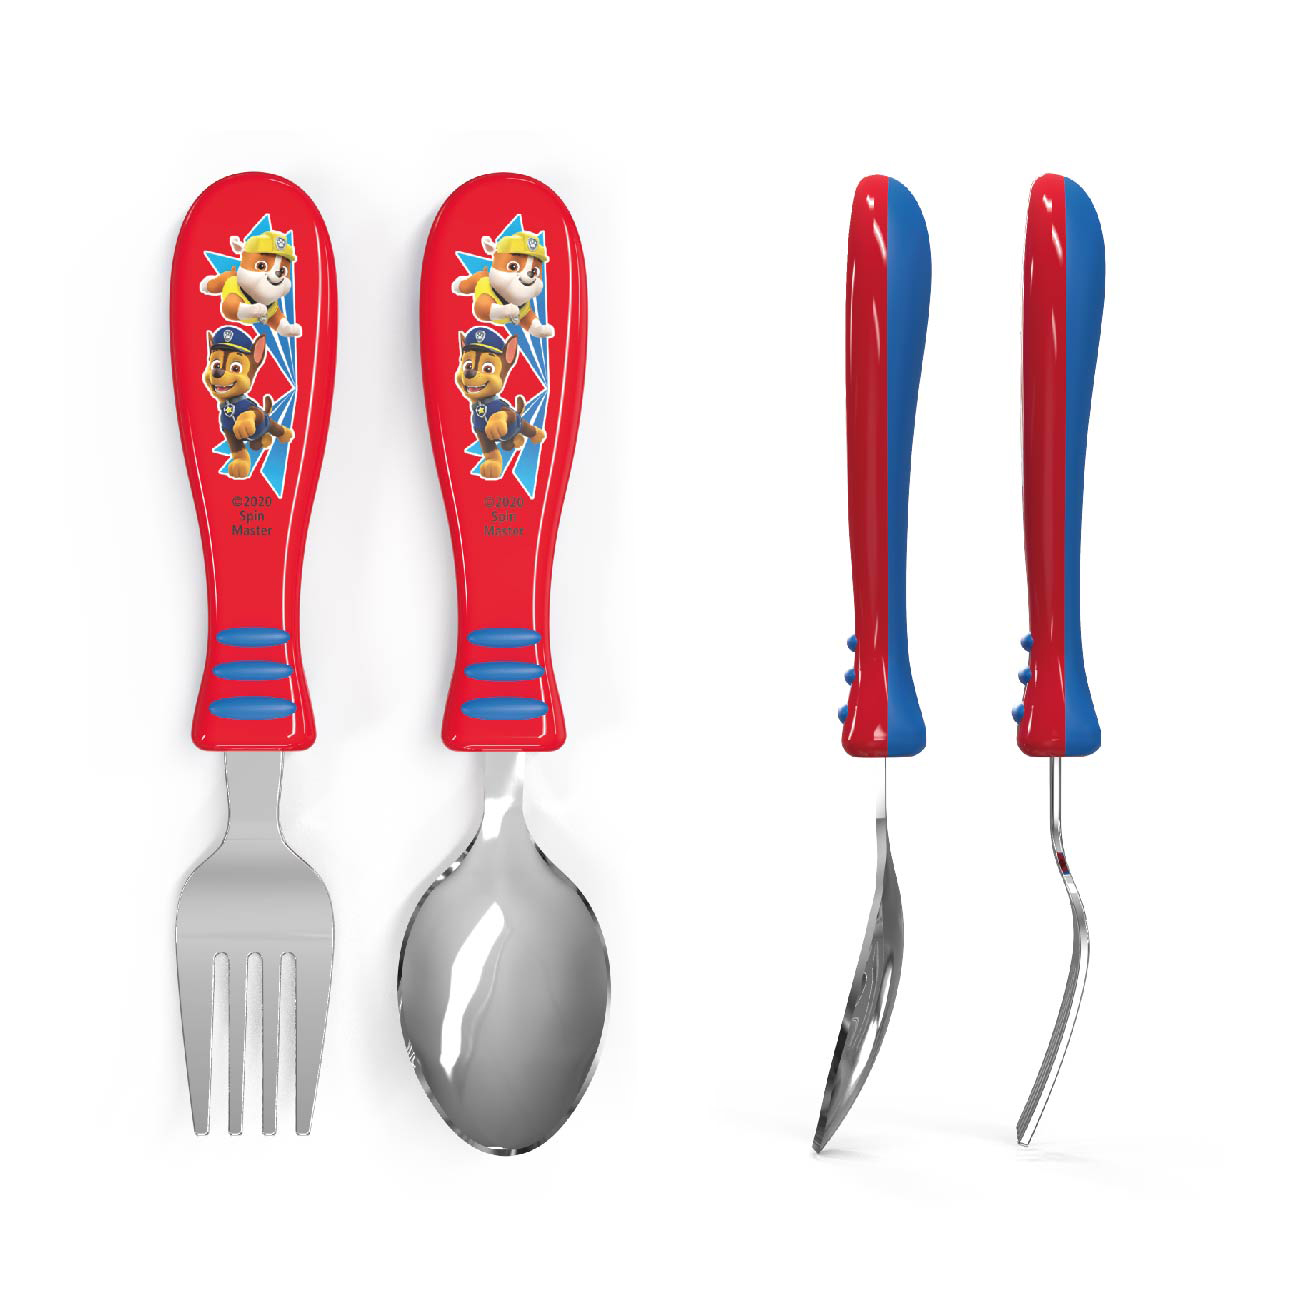 Paw Patrol Kid’s Flatware, Chase and Rubble, 2-piece set slideshow image 3